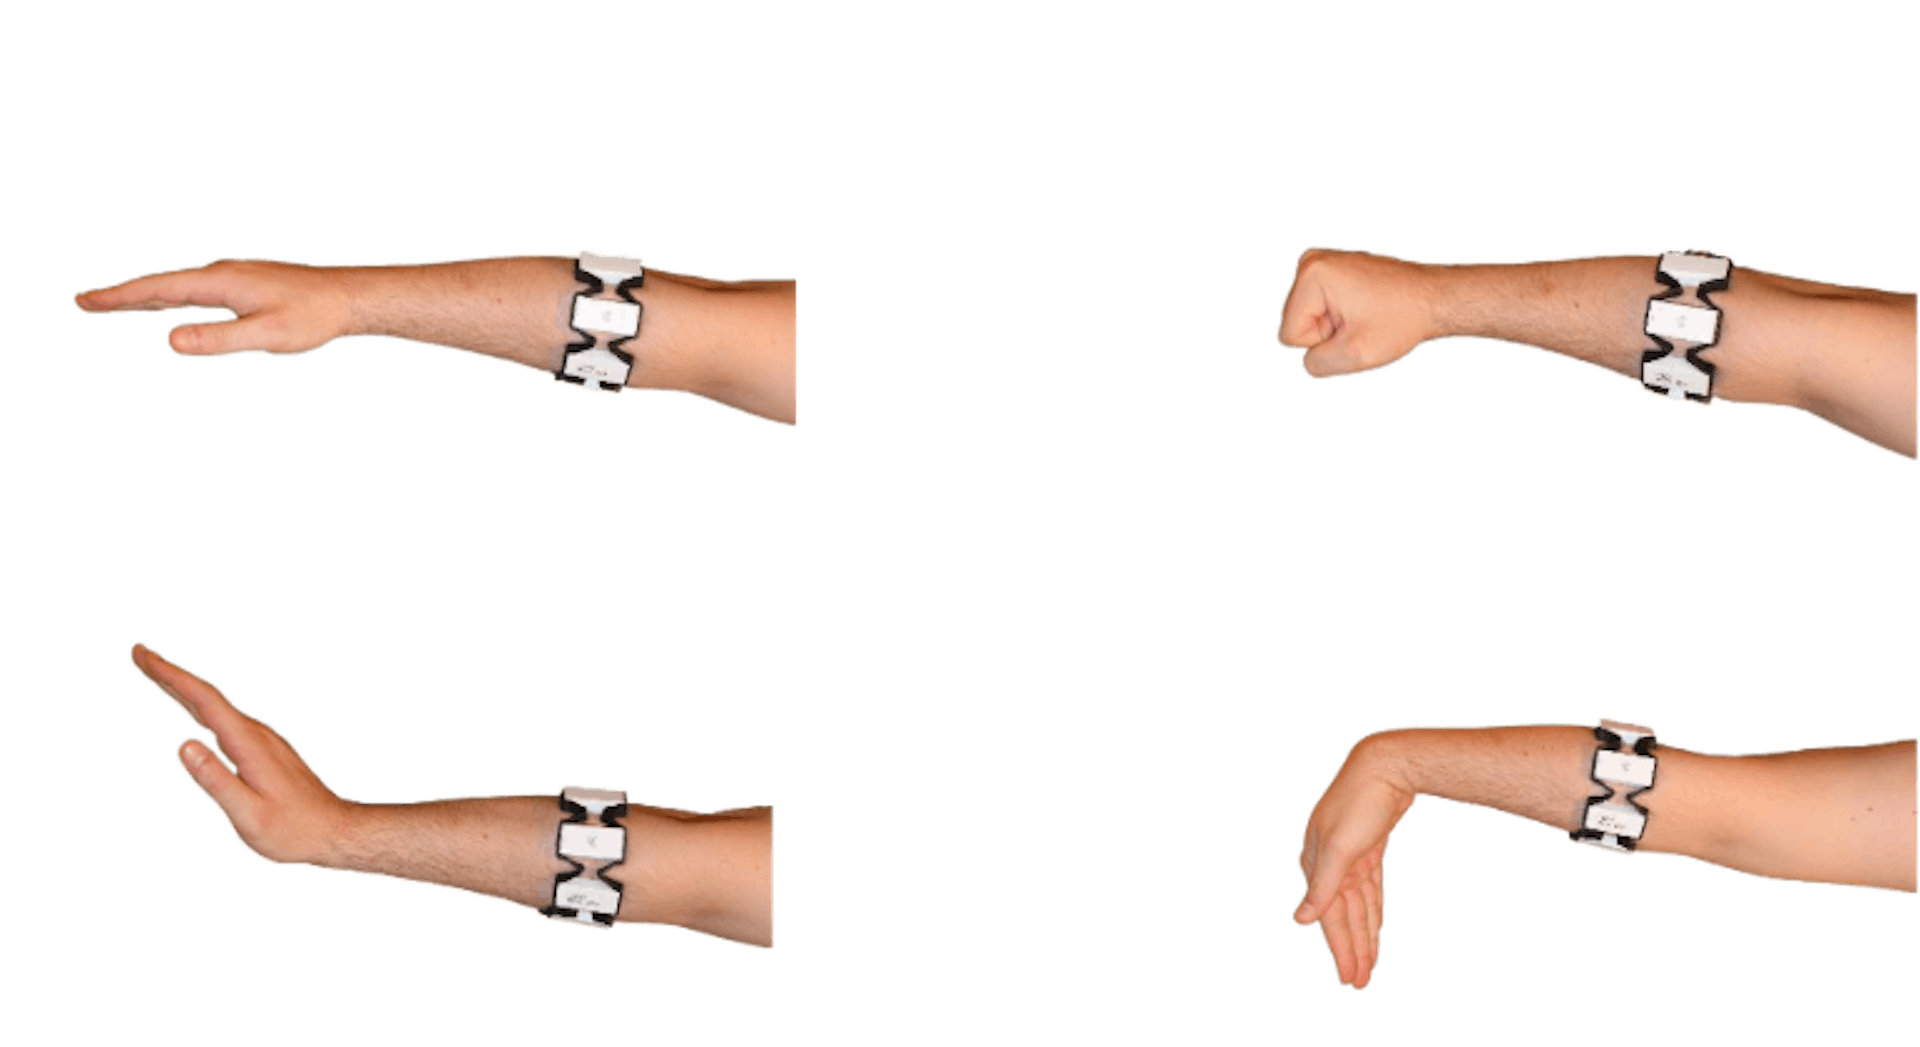 The 4 gestures used in this project. neutral (upper left) | fist (upper right) --> close gripper | extension (bottom left) --> move forward | flexion (bottom right) --> move backward. Images from myo-readings-dataset (https://github.com/aljazfrancic/myo-readings-dataset)